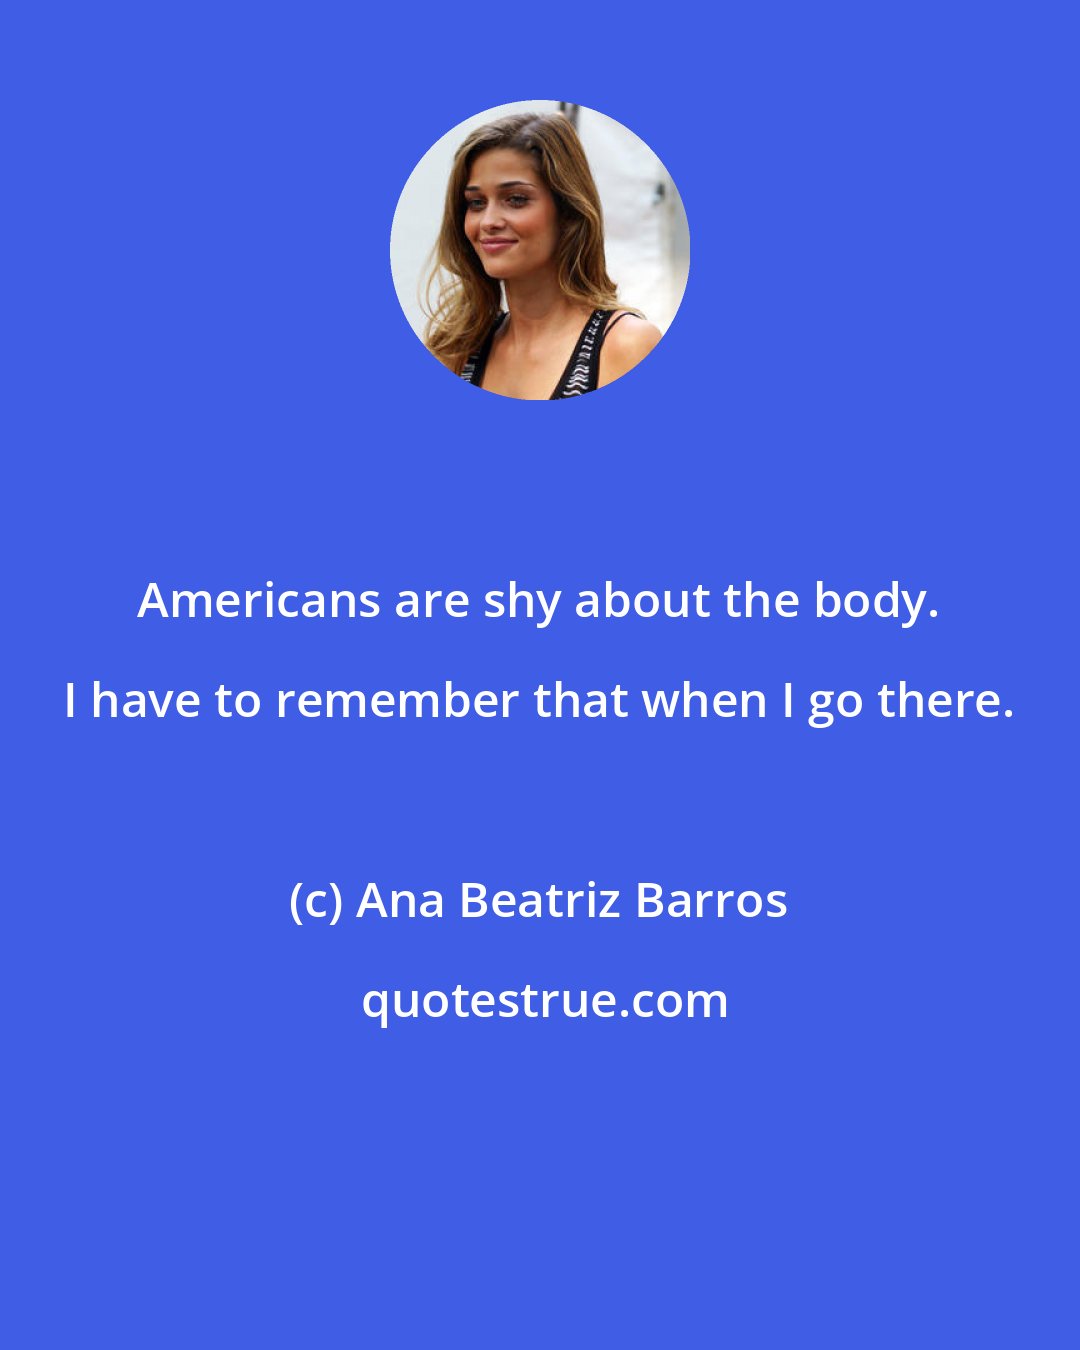 Ana Beatriz Barros: Americans are shy about the body. I have to remember that when I go there.